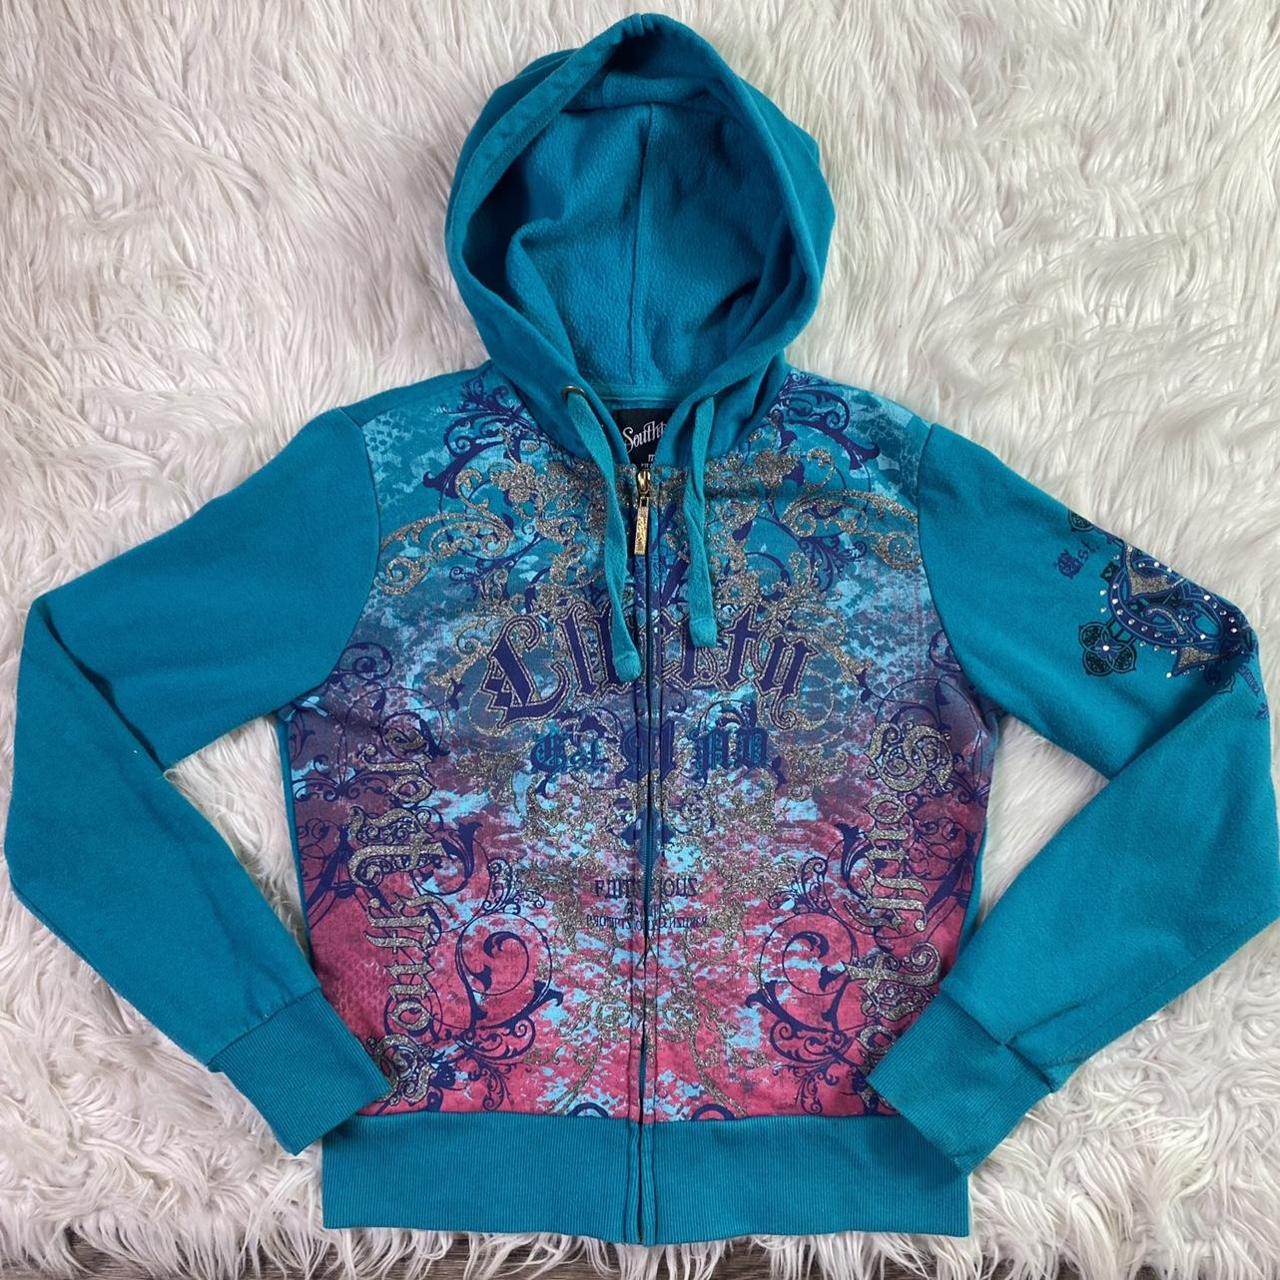 Cyber Y2k Graphic Zip Up Jacket early 2000s teal... - Depop